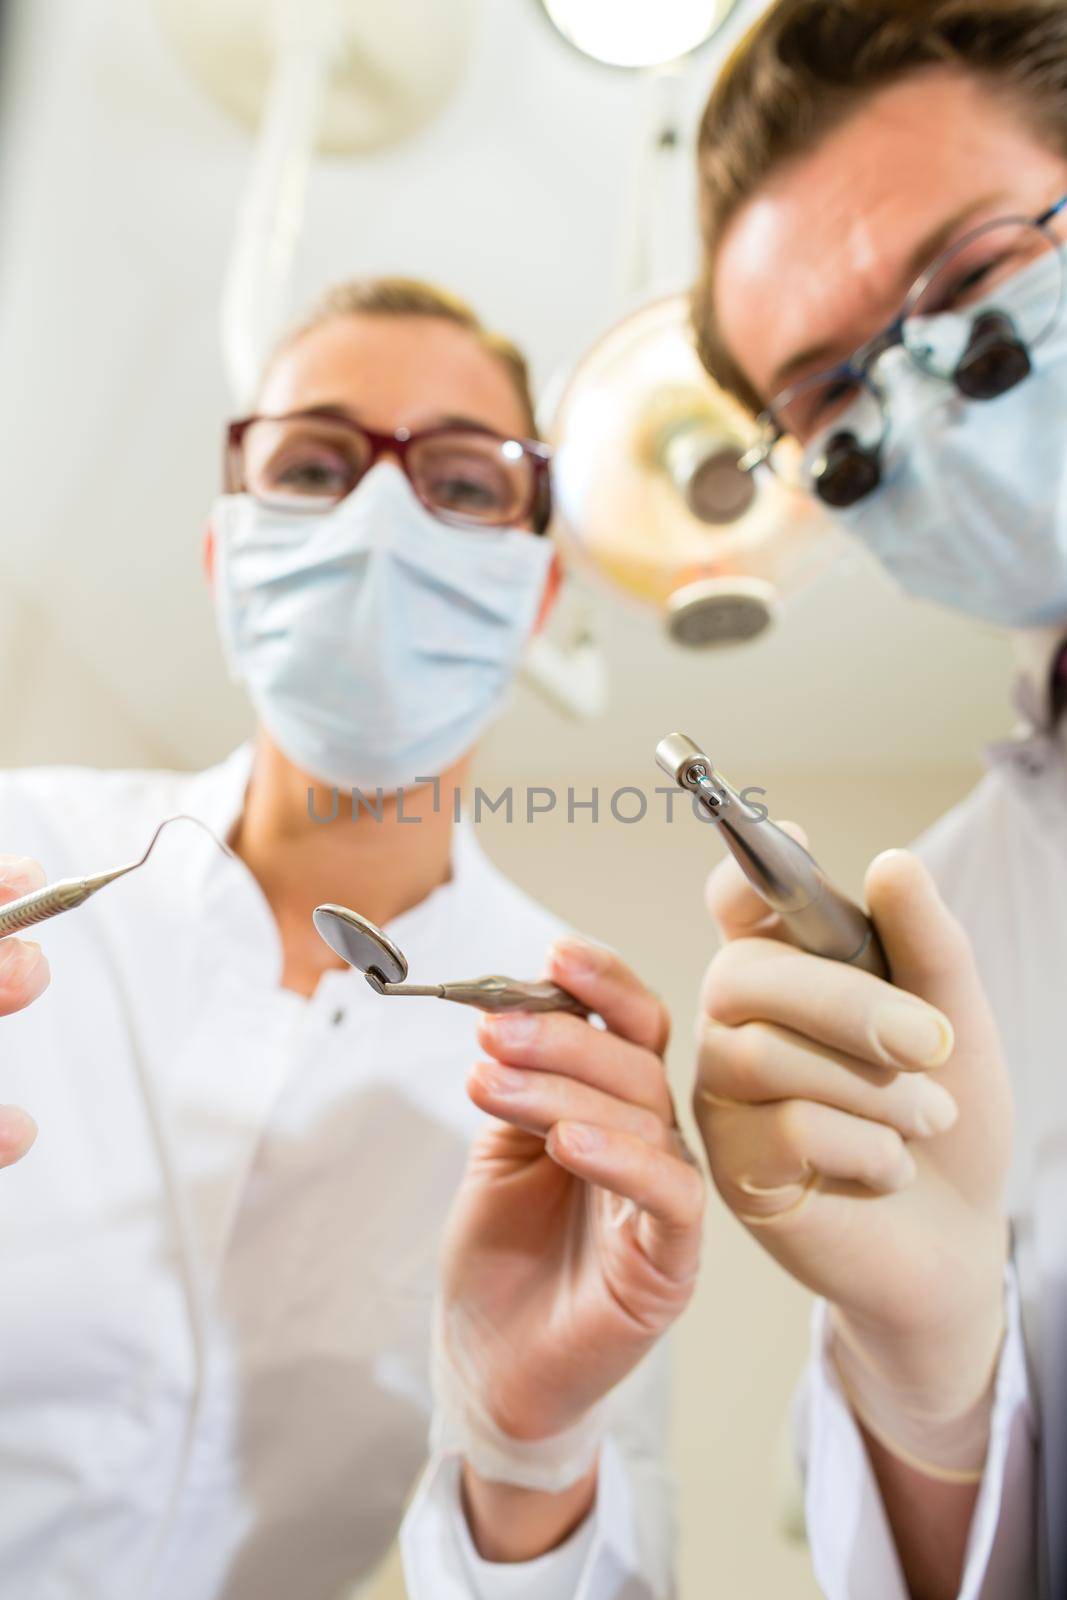 treatment at dentist from perspective of patient by Kzenon